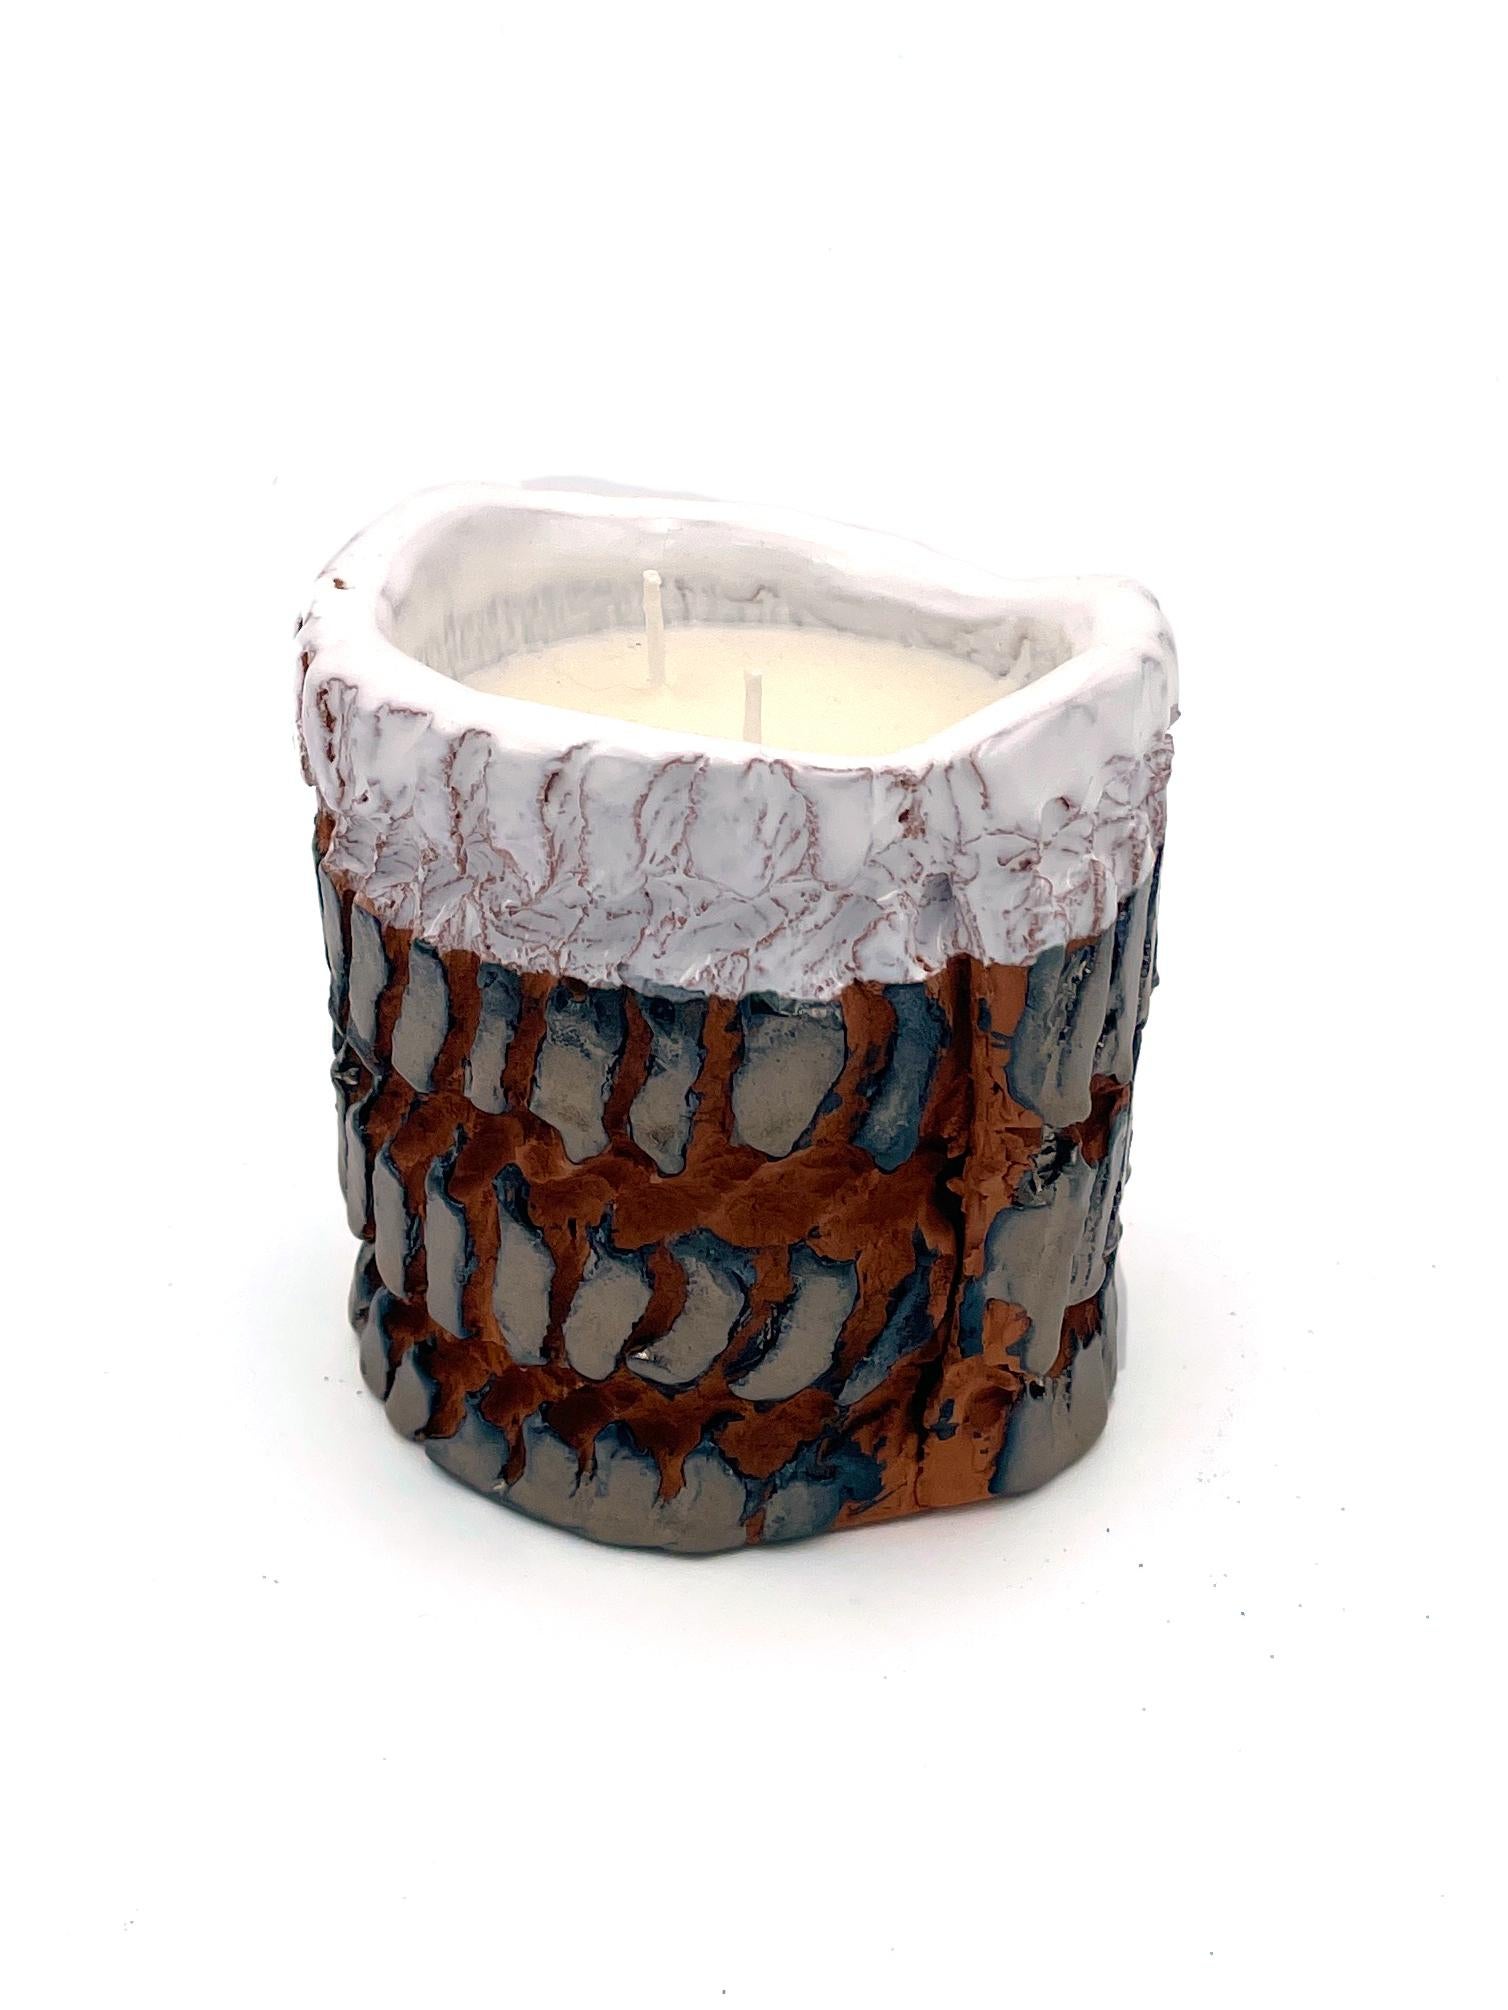 Italian Textile Candle, Soywax Candle in Red Creamic, Platinum and White Glazed For Sale